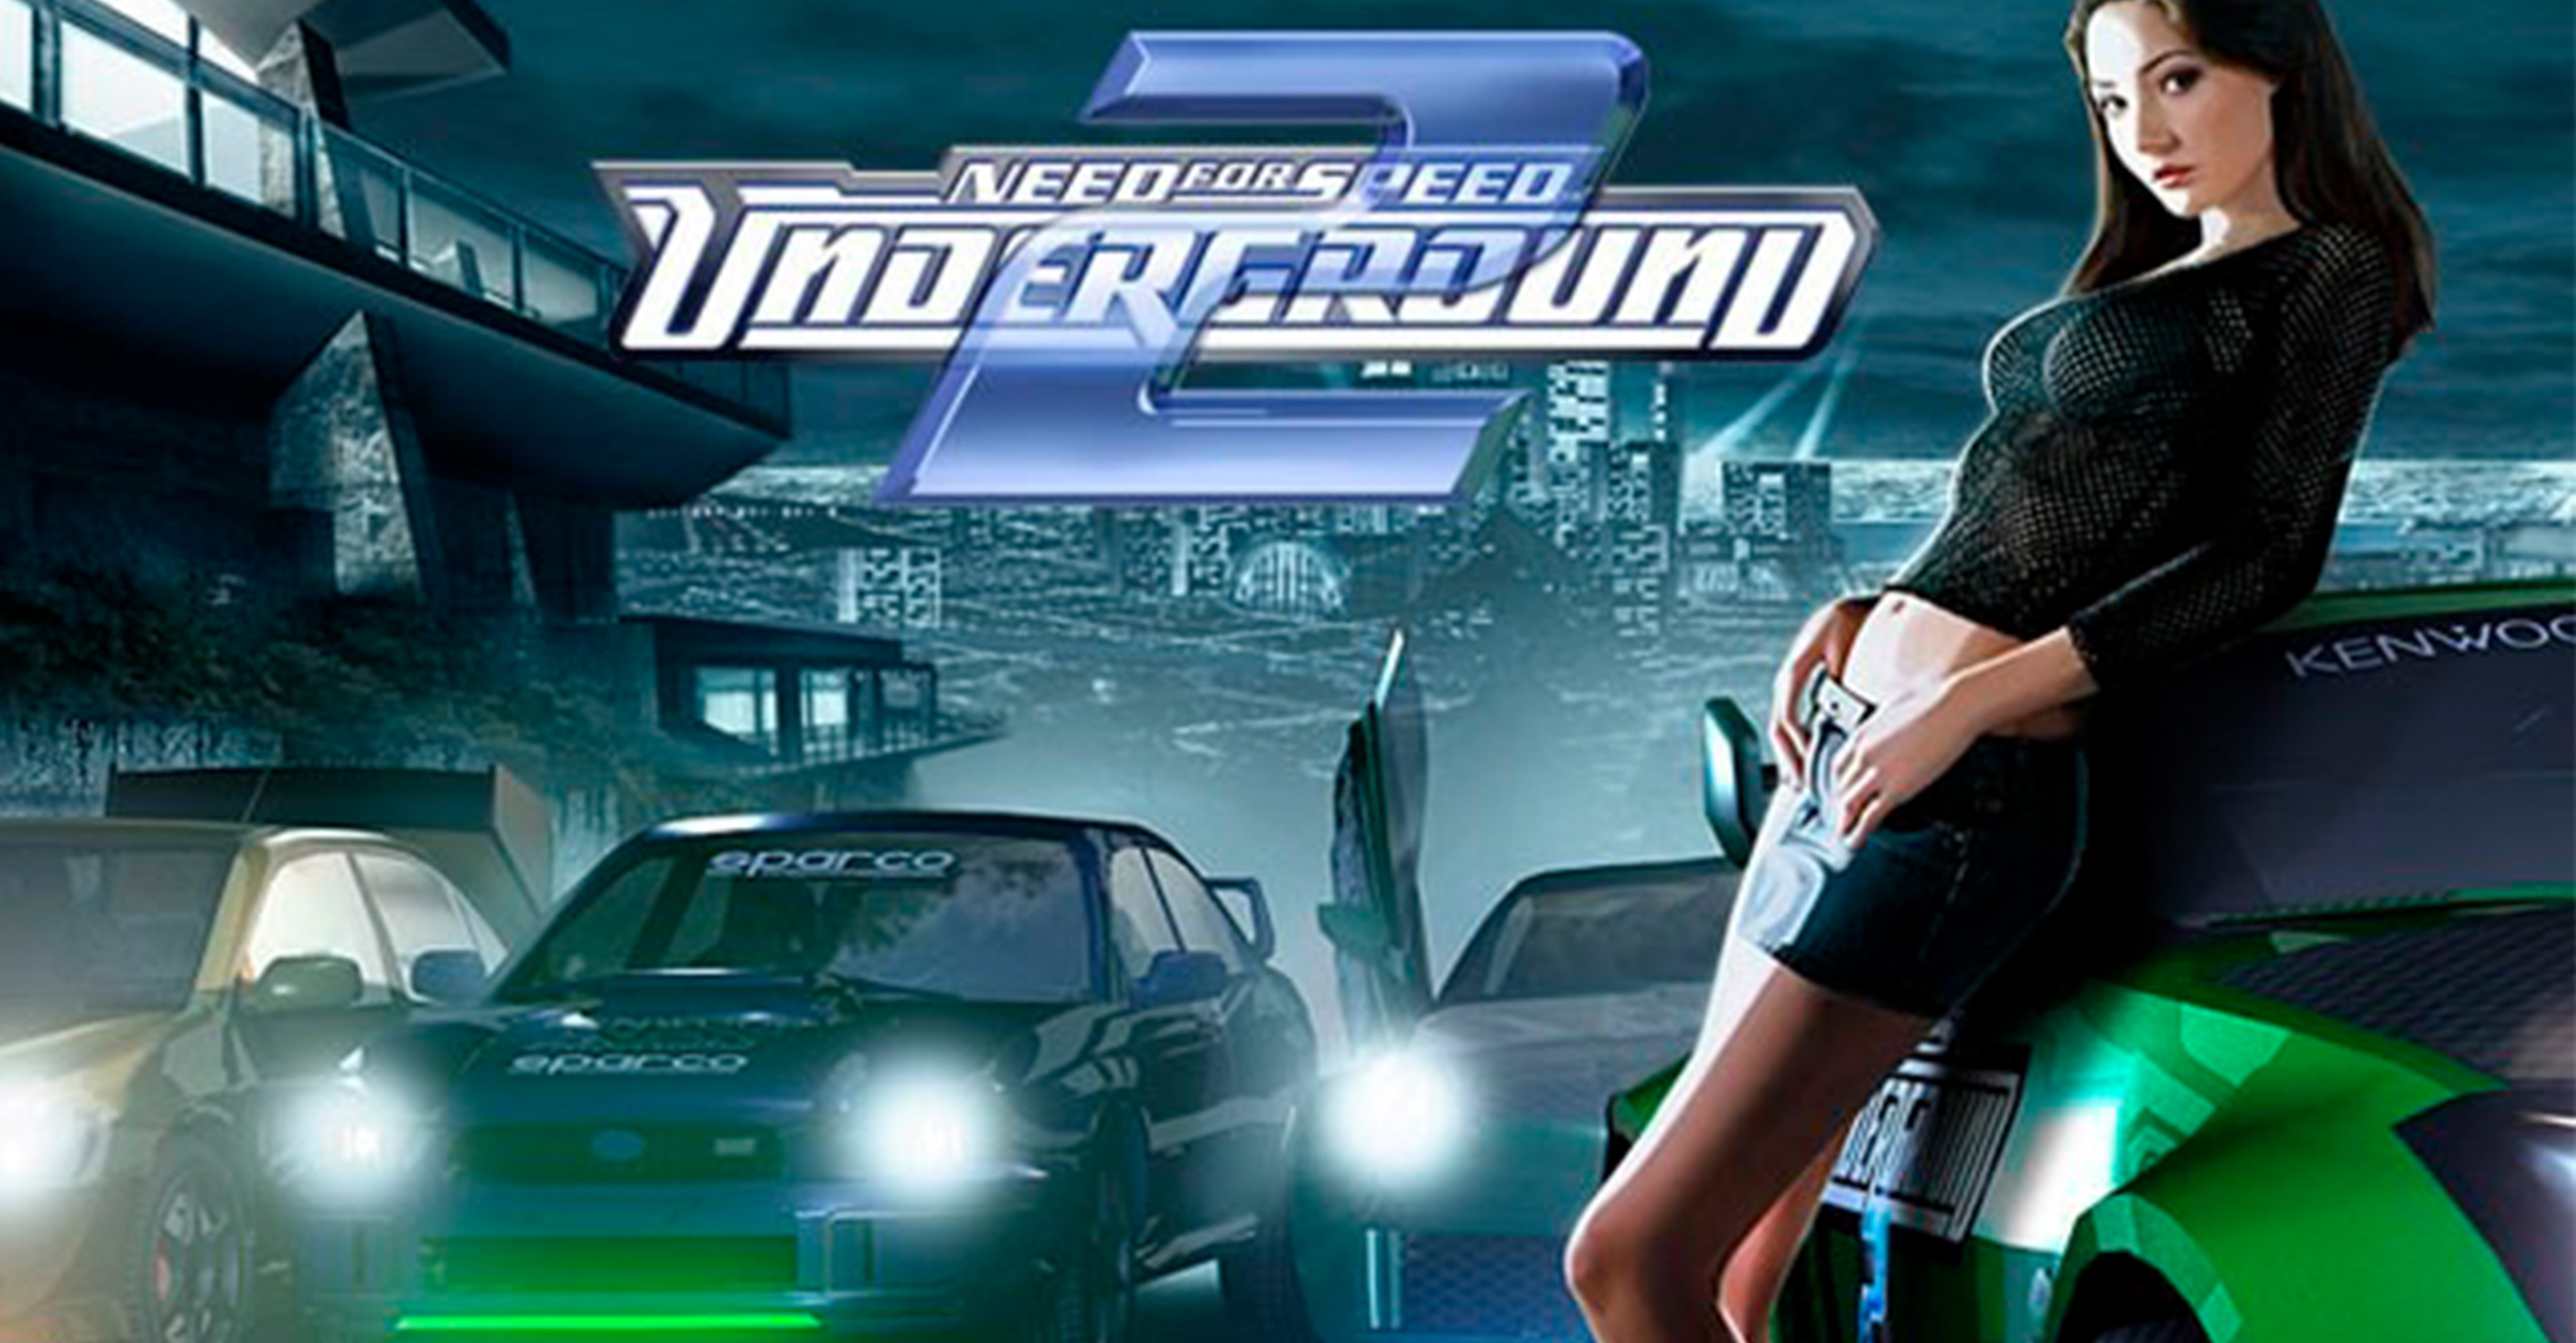 need for speed underground 2 requirements